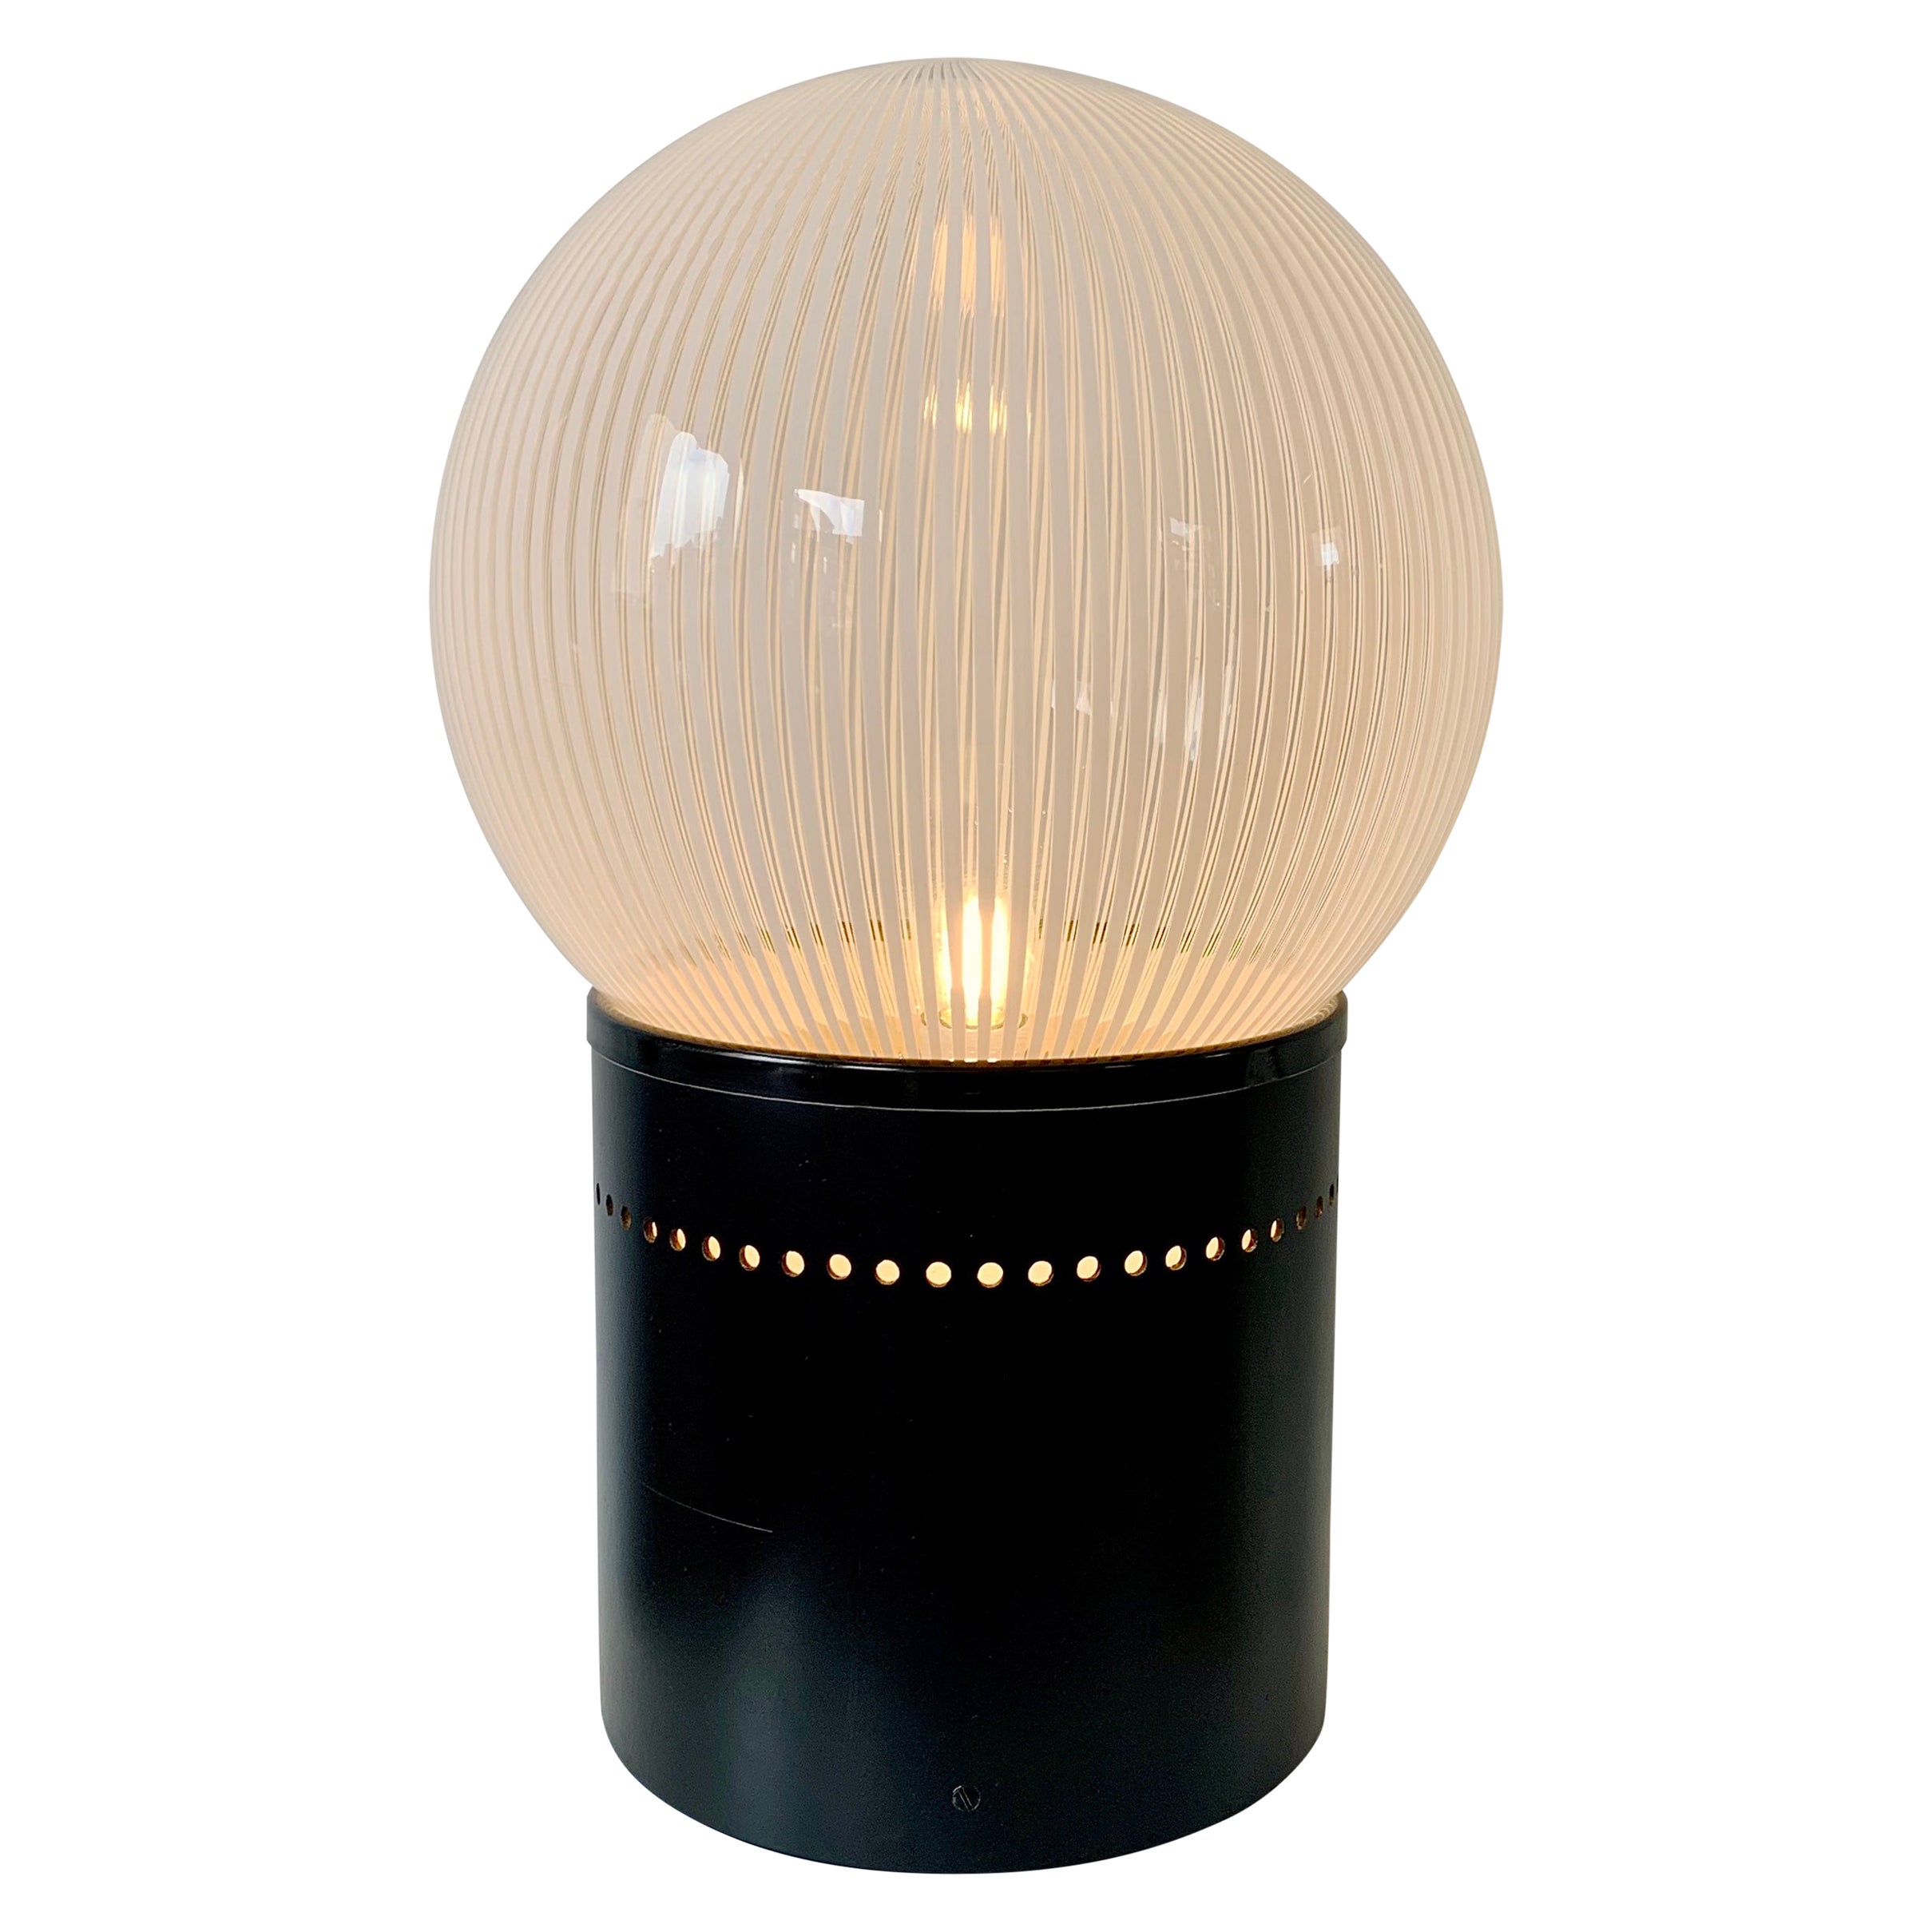 Venini glass table lamp, circa 1960, Italy.
Stripped white and clear Venini glass sphere on a black lacquered base.
Rewired, ready for use.
Dimensions:  56 cm H, 34 cm diameter.
Good original condition.
All purchases are covered by our Buyer